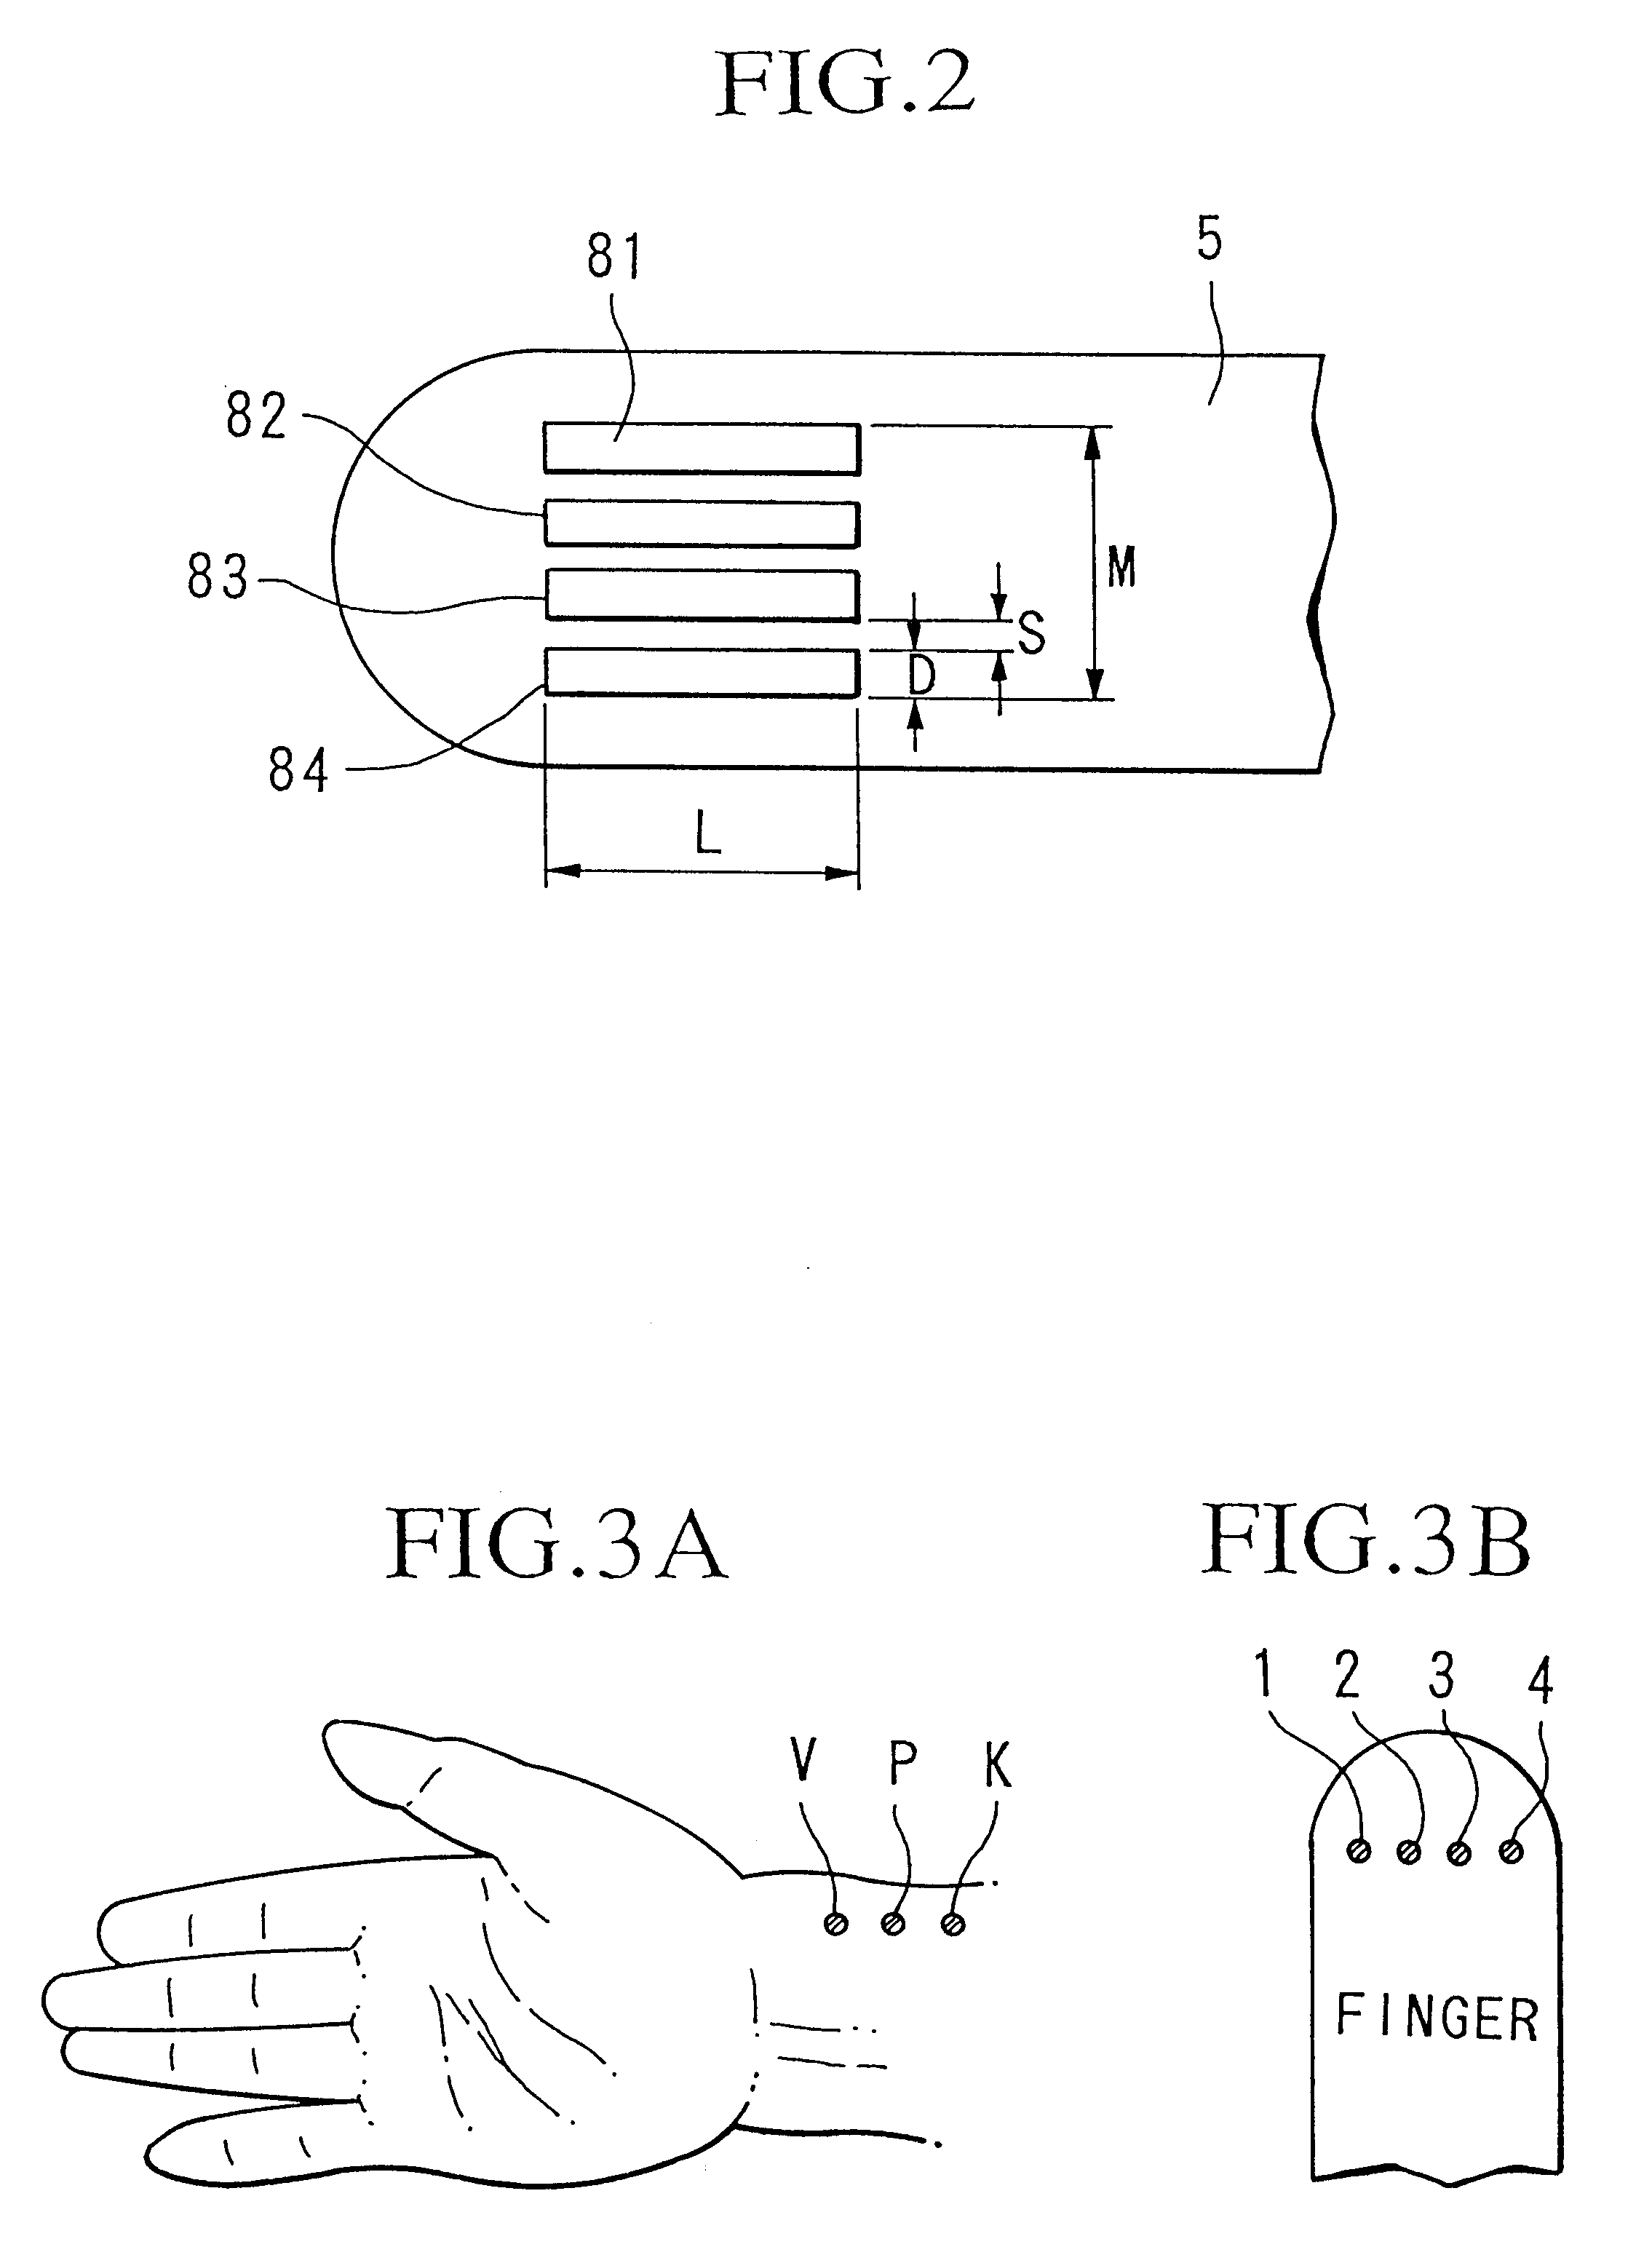 Diagnostic apparatus for analyzing arterial pulse waves